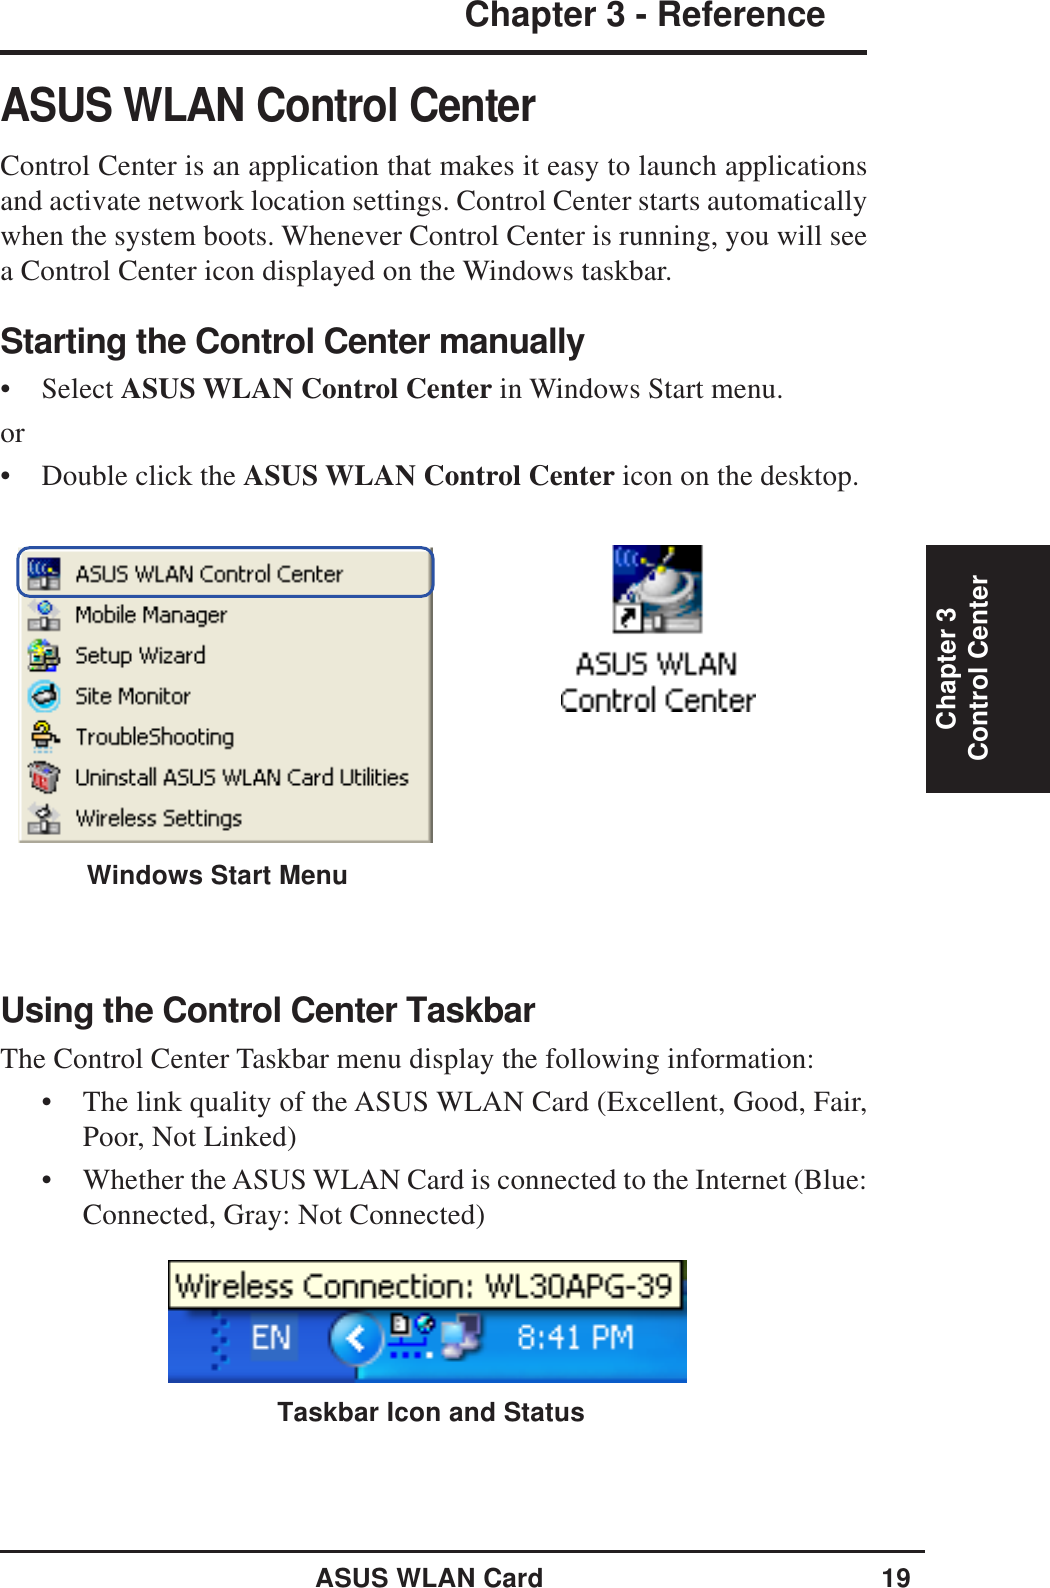 ASUS WLAN Card 19Chapter 3 - ReferenceChapter 3Control CenterASUS WLAN Control CenterControl Center is an application that makes it easy to launch applicationsand activate network location settings. Control Center starts automaticallywhen the system boots. Whenever Control Center is running, you will seea Control Center icon displayed on the Windows taskbar.Starting the Control Center manually• Select ASUS WLAN Control Center in Windows Start menu.or• Double click the ASUS WLAN Control Center icon on the desktop.Using the Control Center TaskbarThe Control Center Taskbar menu display the following information:• The link quality of the ASUS WLAN Card (Excellent, Good, Fair,Poor, Not Linked)• Whether the ASUS WLAN Card is connected to the Internet (Blue:Connected, Gray: Not Connected)Taskbar Icon and StatusWindows Start Menu